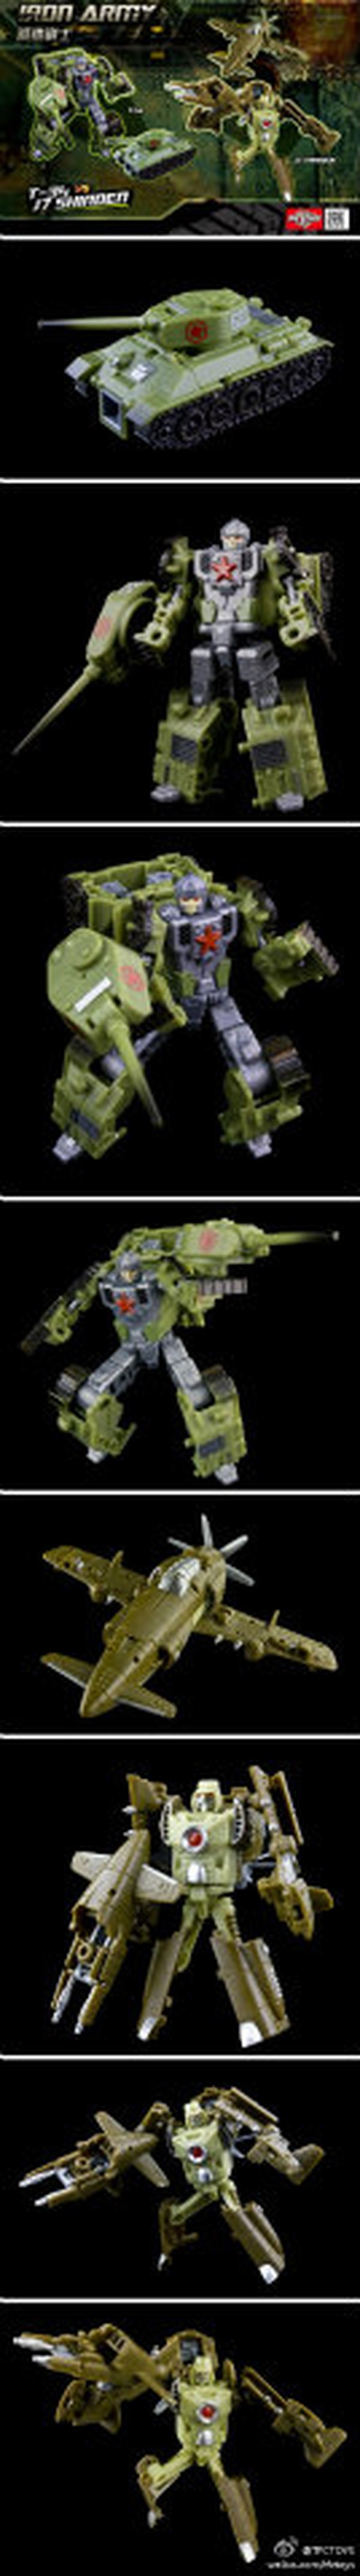 TFC Toys Shows Off Robot Modes of Iron Army, the 3rd Party Power Core Combiners Limbs